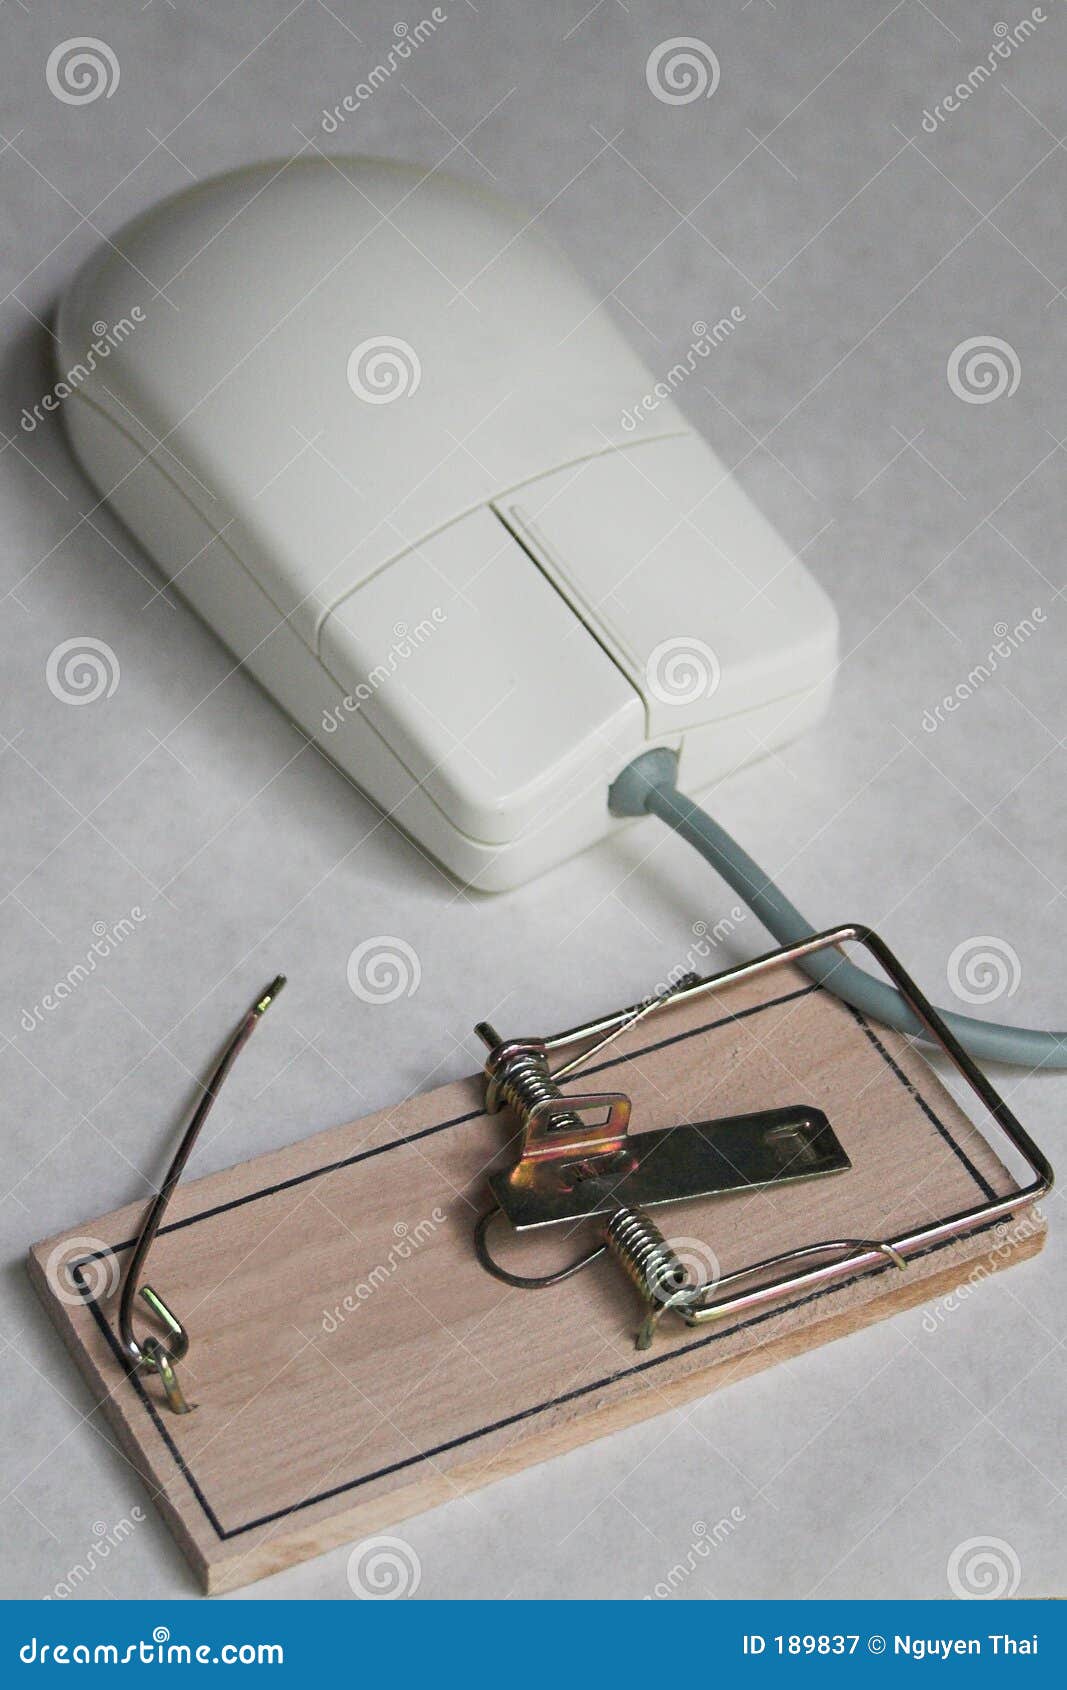 Computer mouse with a mouse trap.Computer Mouse With A Mouse Trap Stock Image - Image of technology, trap: 189837 - 웹